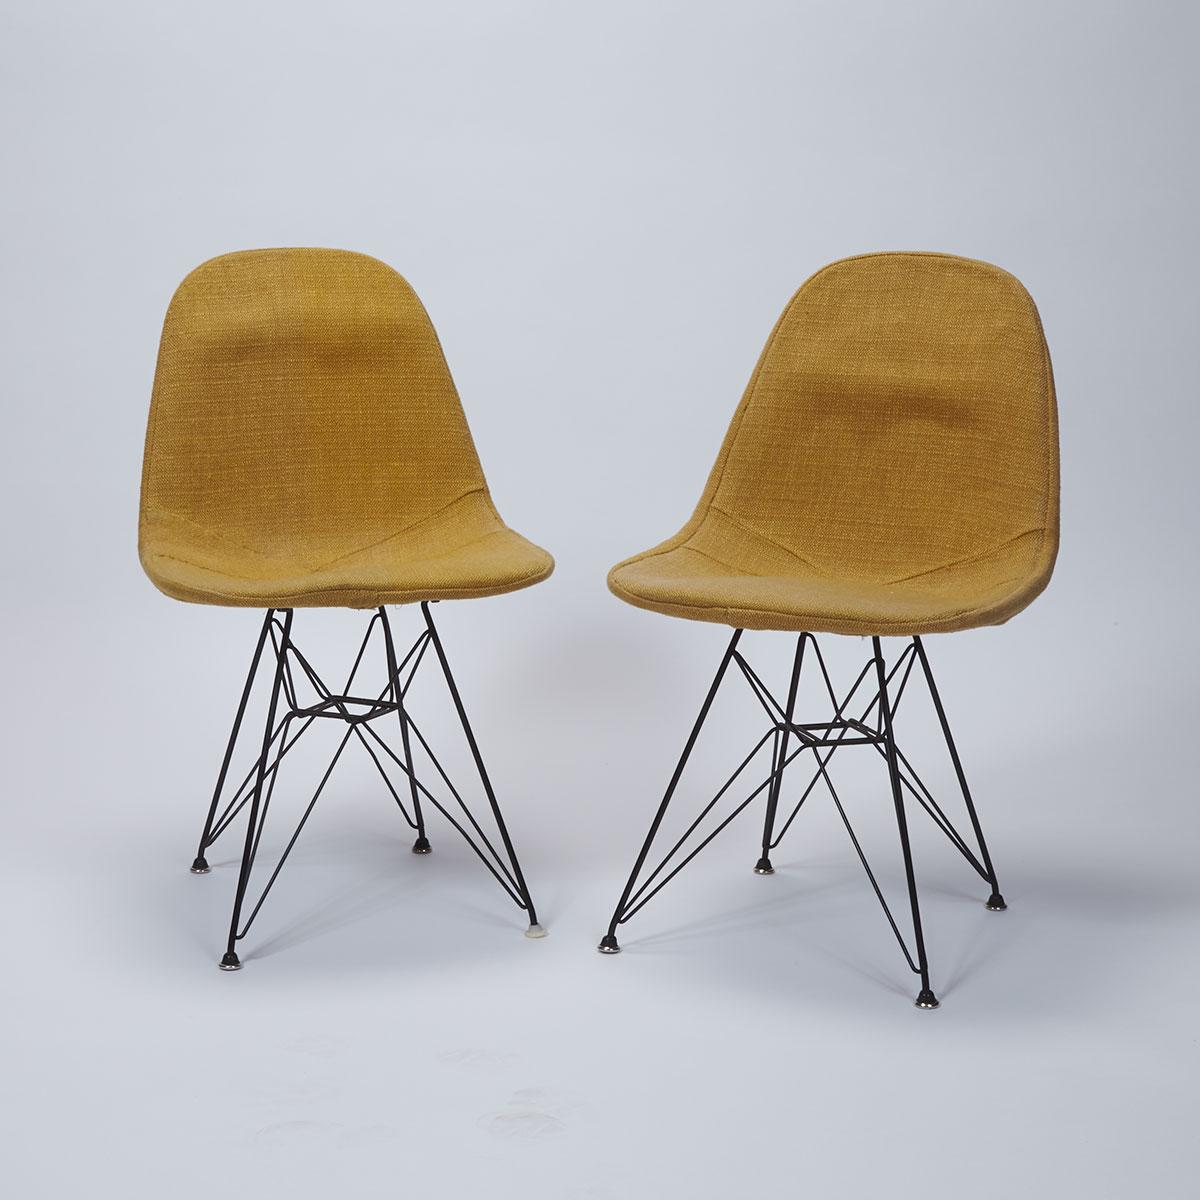 PAIR OF EIFFEL side CHAIRS BY CHARLES AND RAY EAMES FOR HERMAN MILLER
